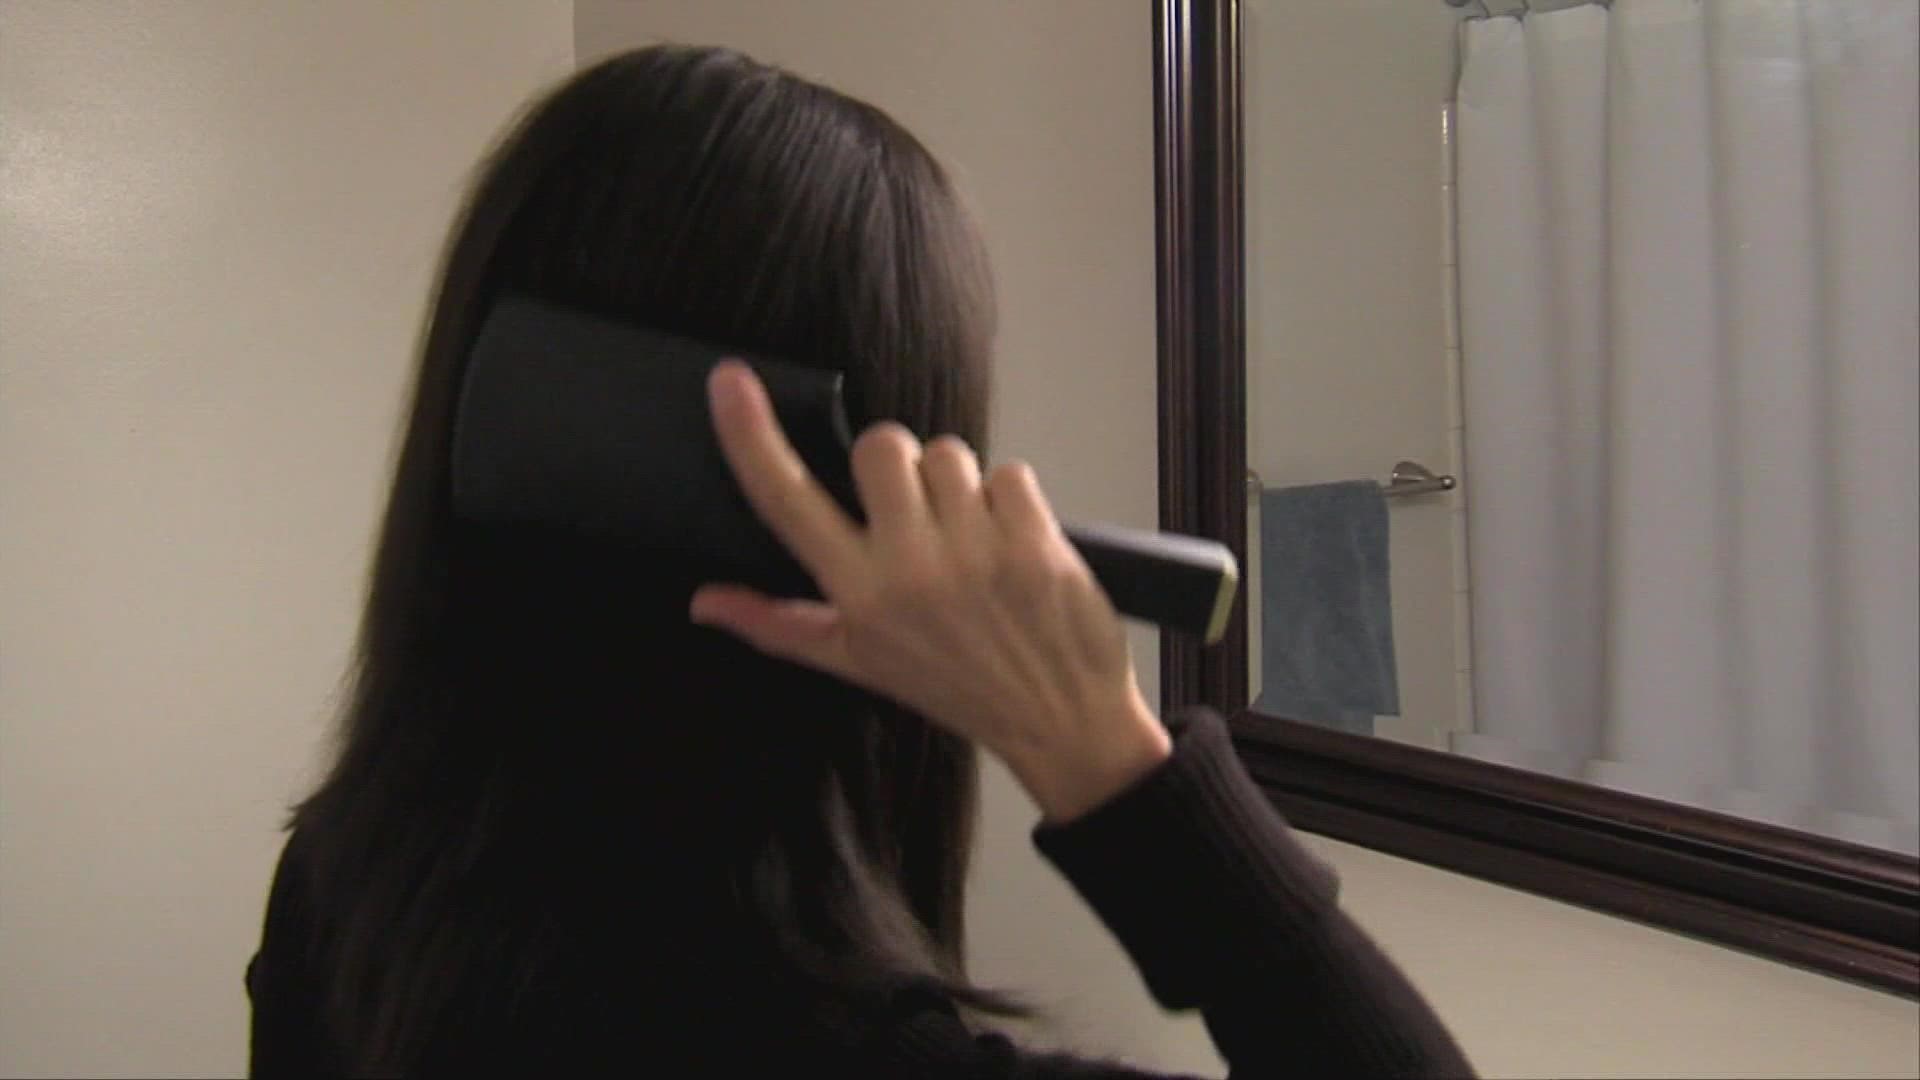 Experts at a Greensboro scalp restoration facility are seeing an increase in customers.